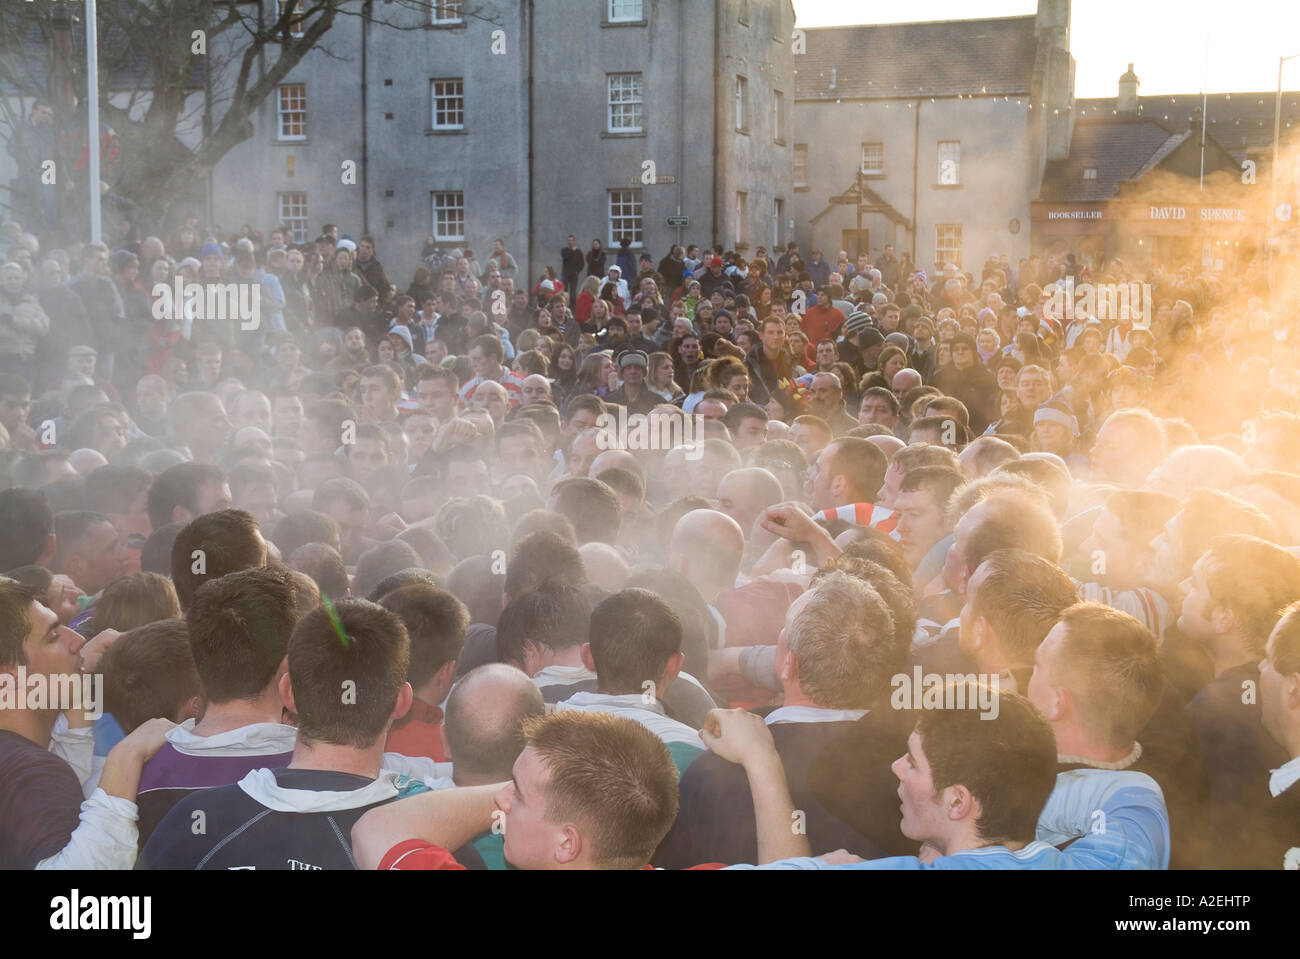 dh Christmas Ba Game KIRKWALL EVENTS ORKNEY SCOTLAND Pack of Ba players spectators in street people mass Stock Photo